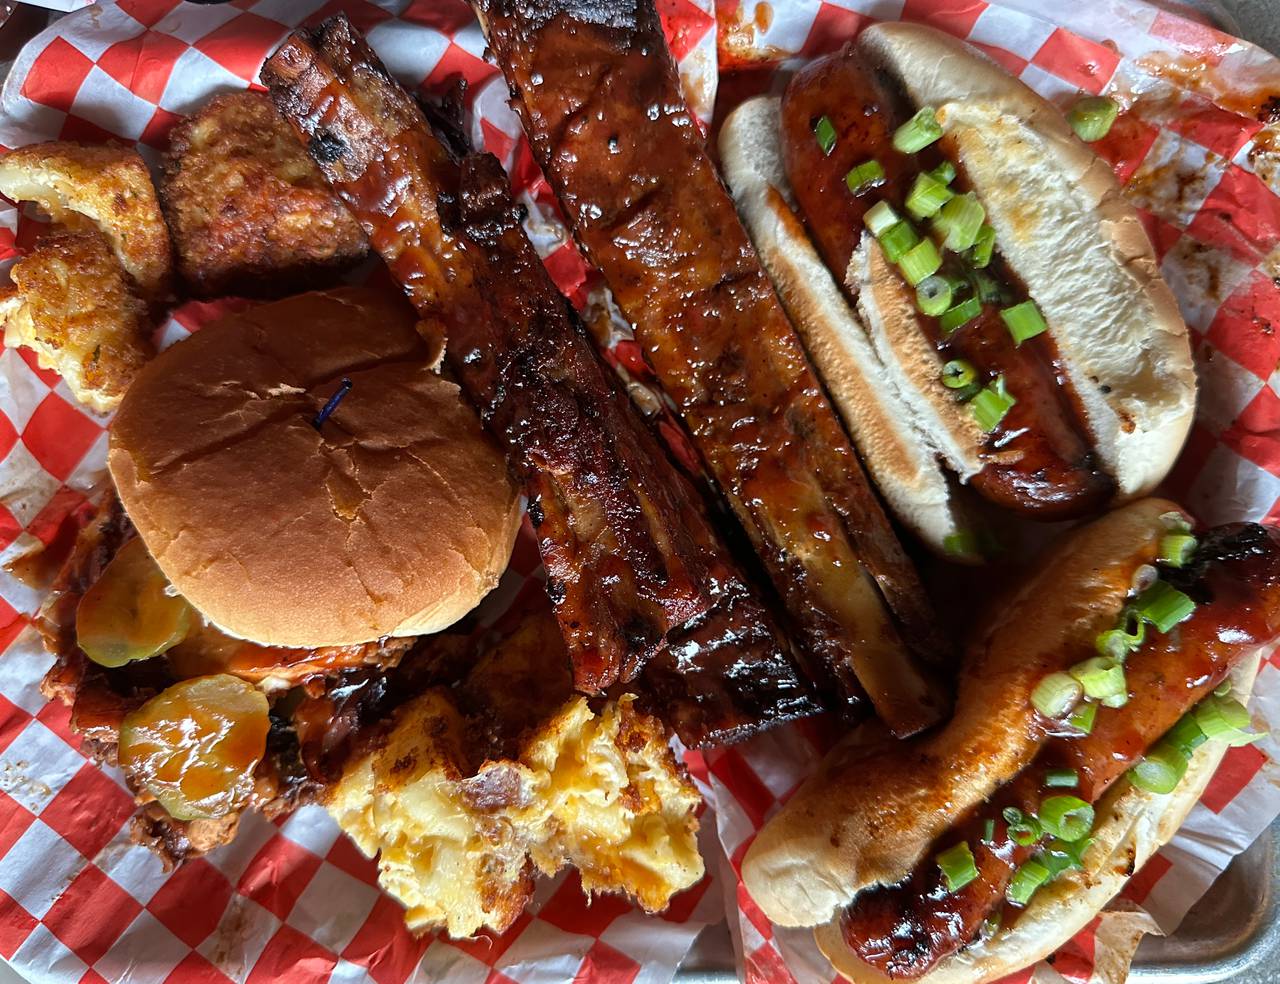 Clockwise from top left: fried mac n cheese balls, ribs, smoked spicy sausage and a drunk chicken sandwich from Southern N Smoked in Cross Street Market.